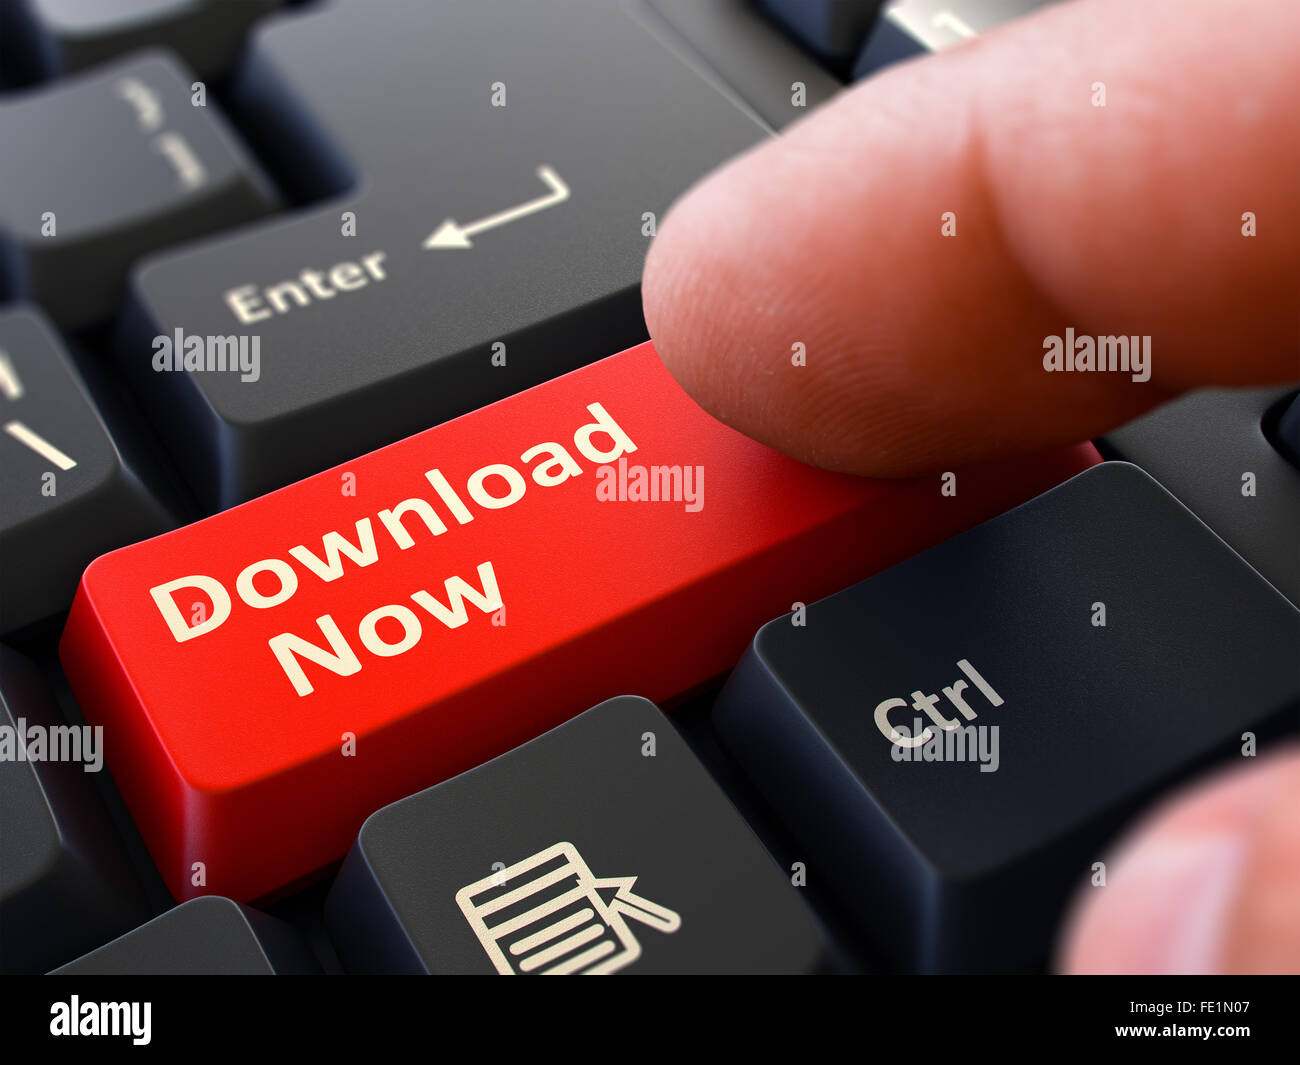 Download Now - Concept on Red Keyboard Button. Stock Photo